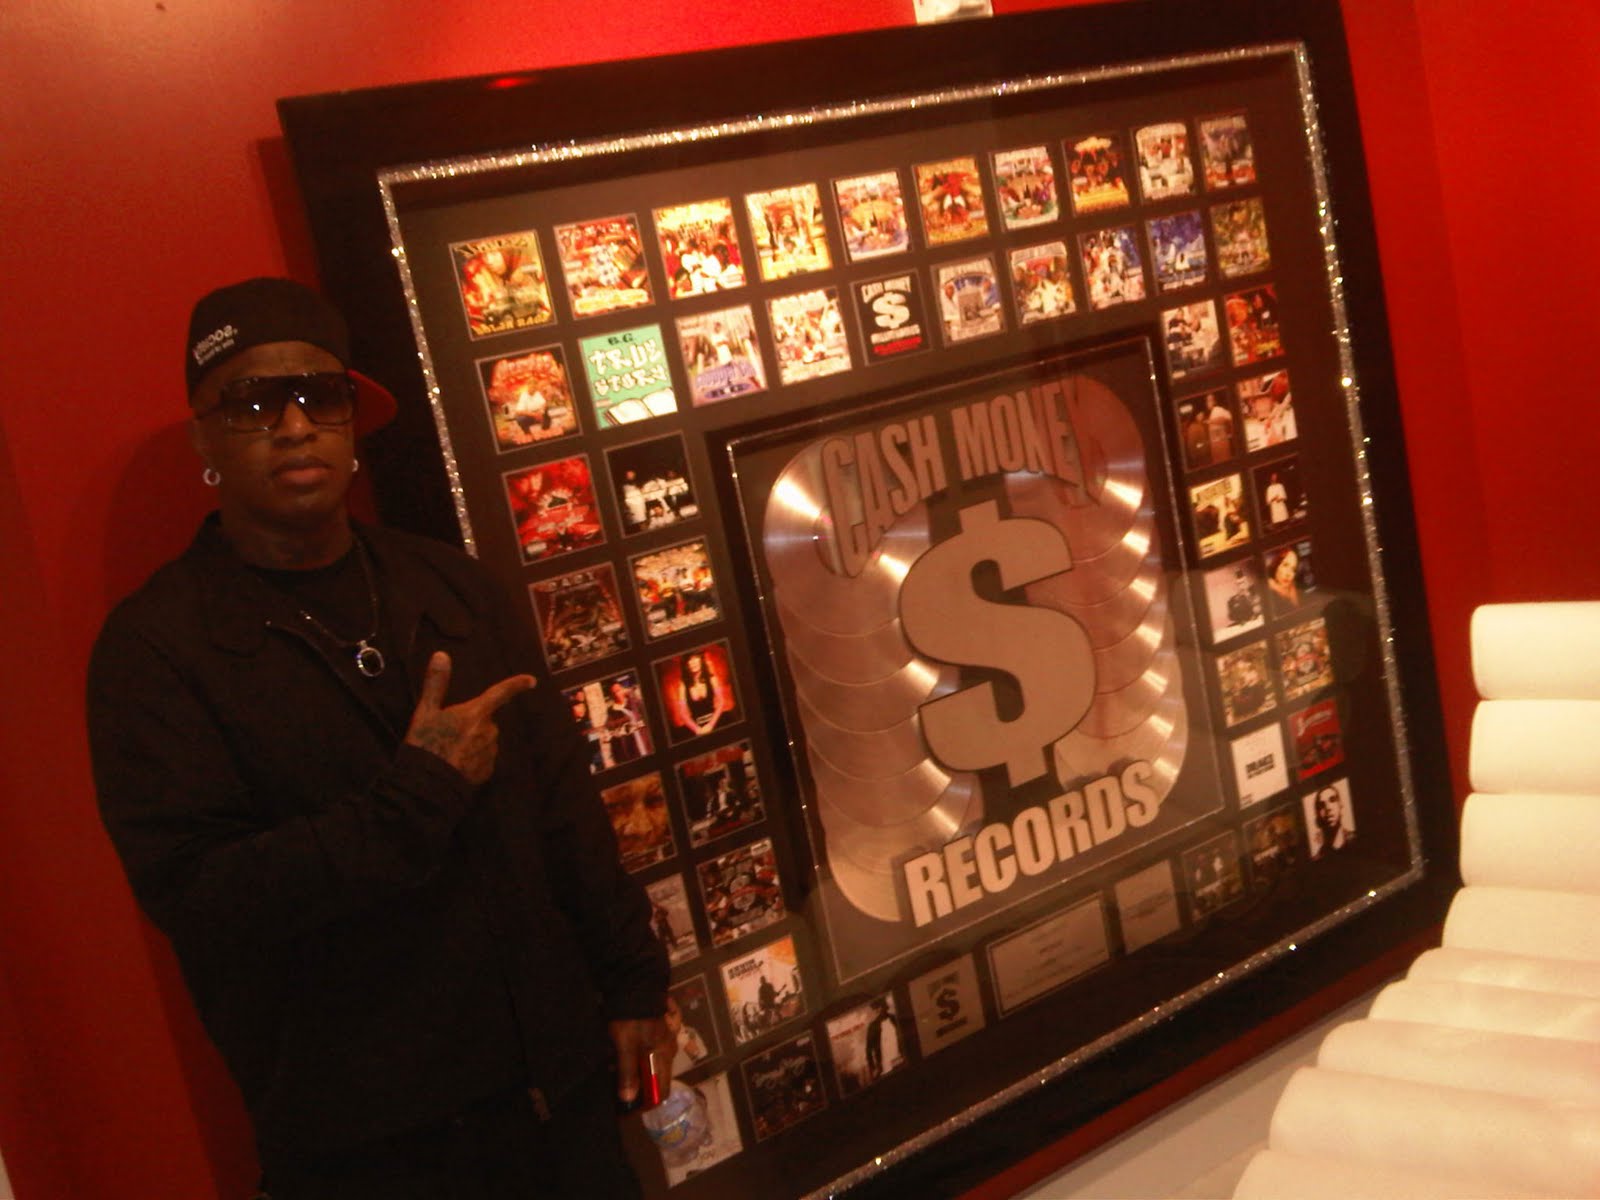 IMG00825-20101012-2142 Birdman Hopes To Release 16 Albums On Cash Money In 2012  